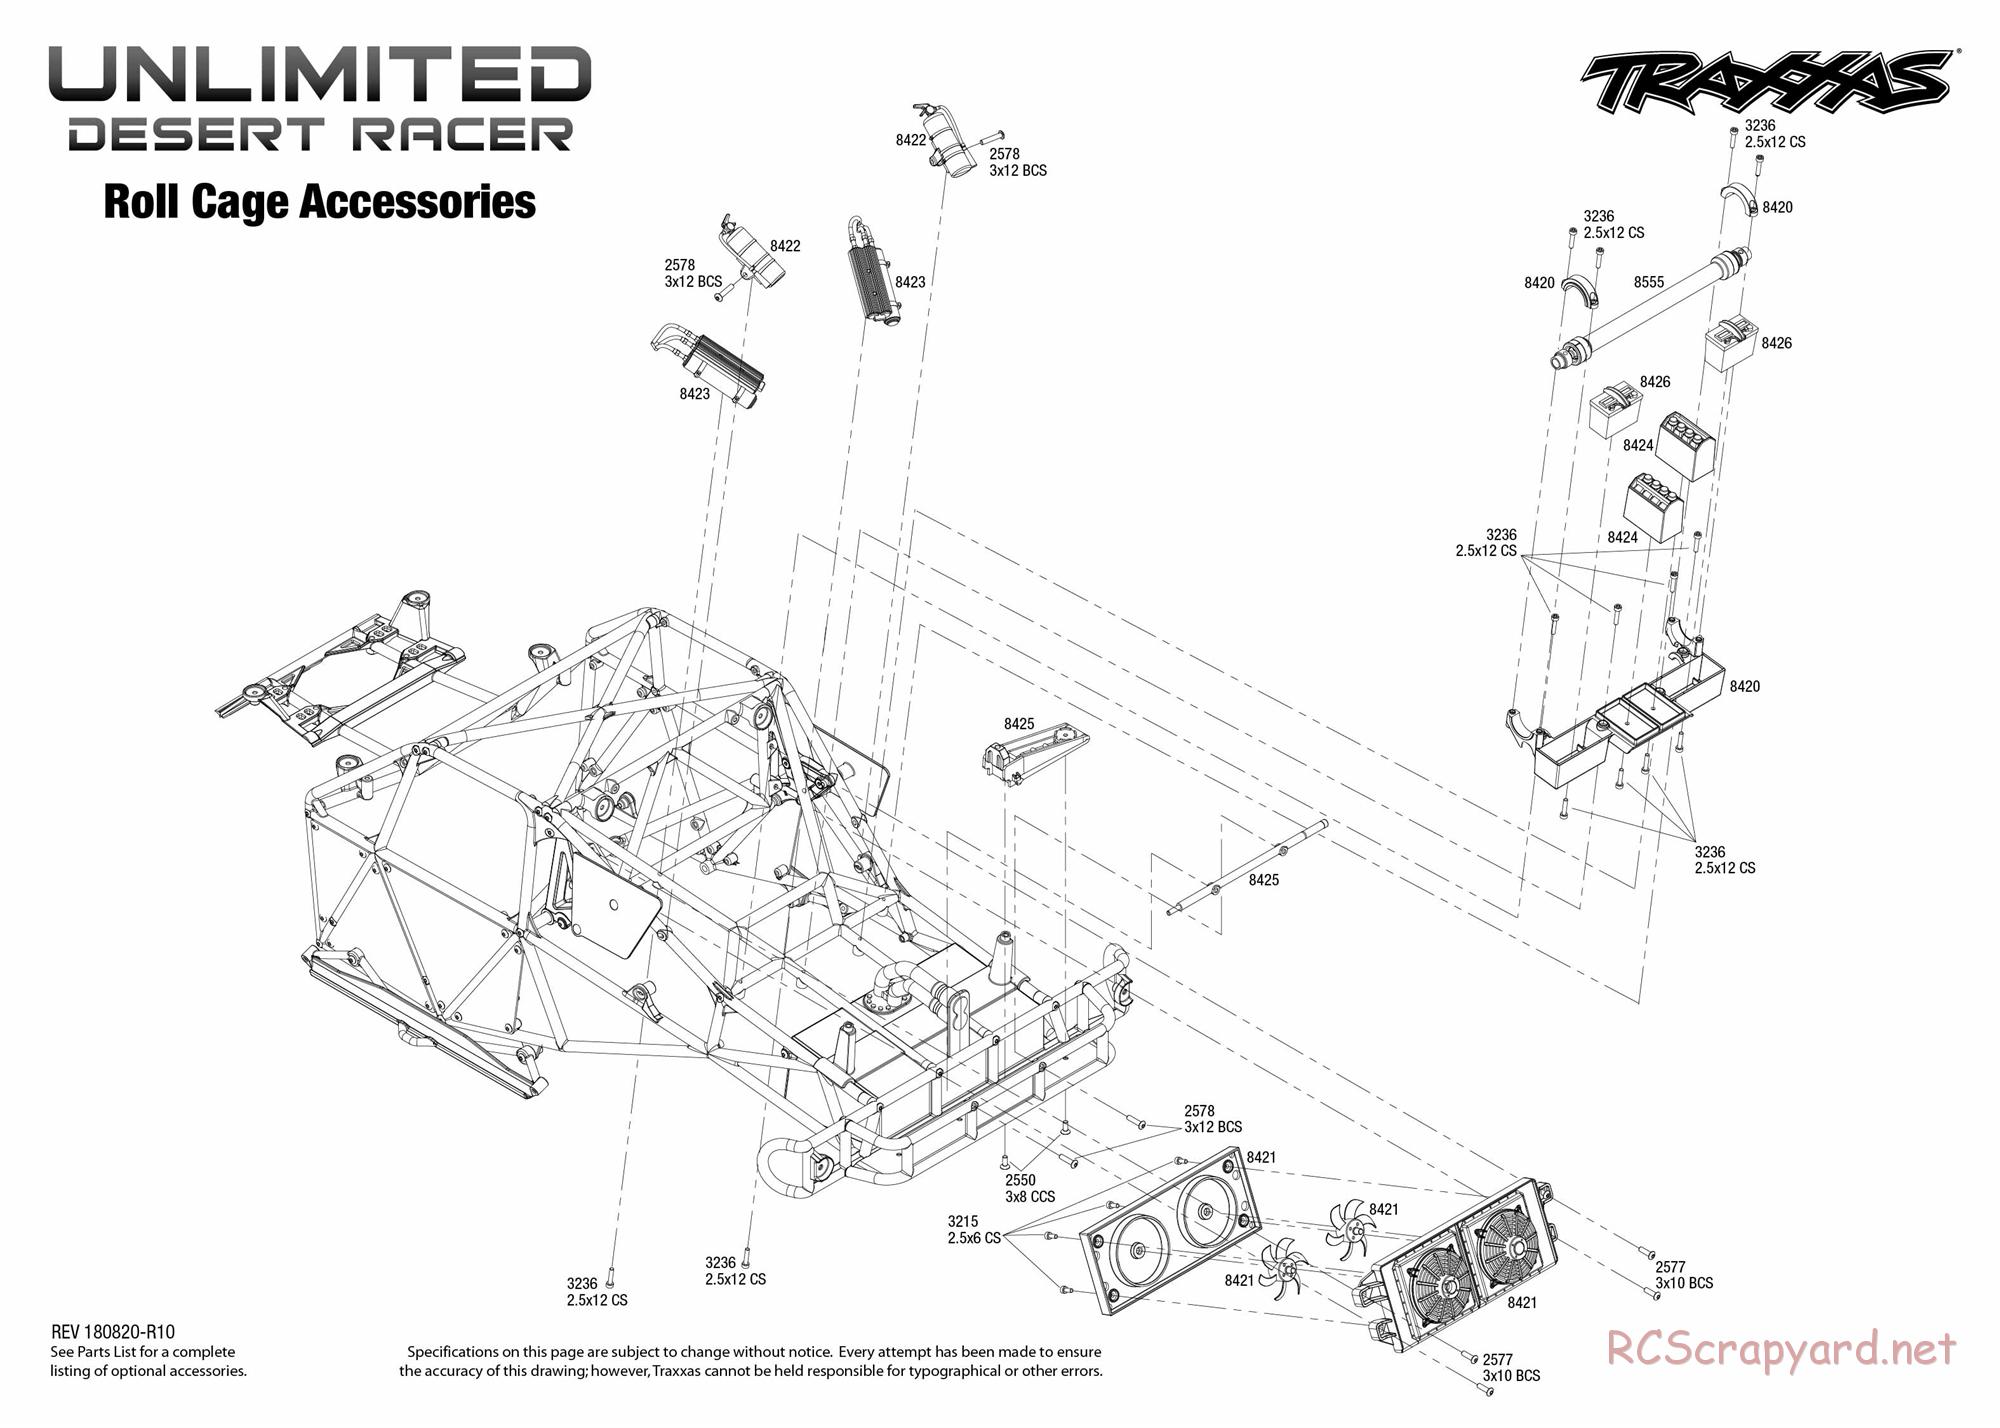 Traxxas - Unlimited Desert Racer VXL TSM (2018) - Exploded Views - Page 5